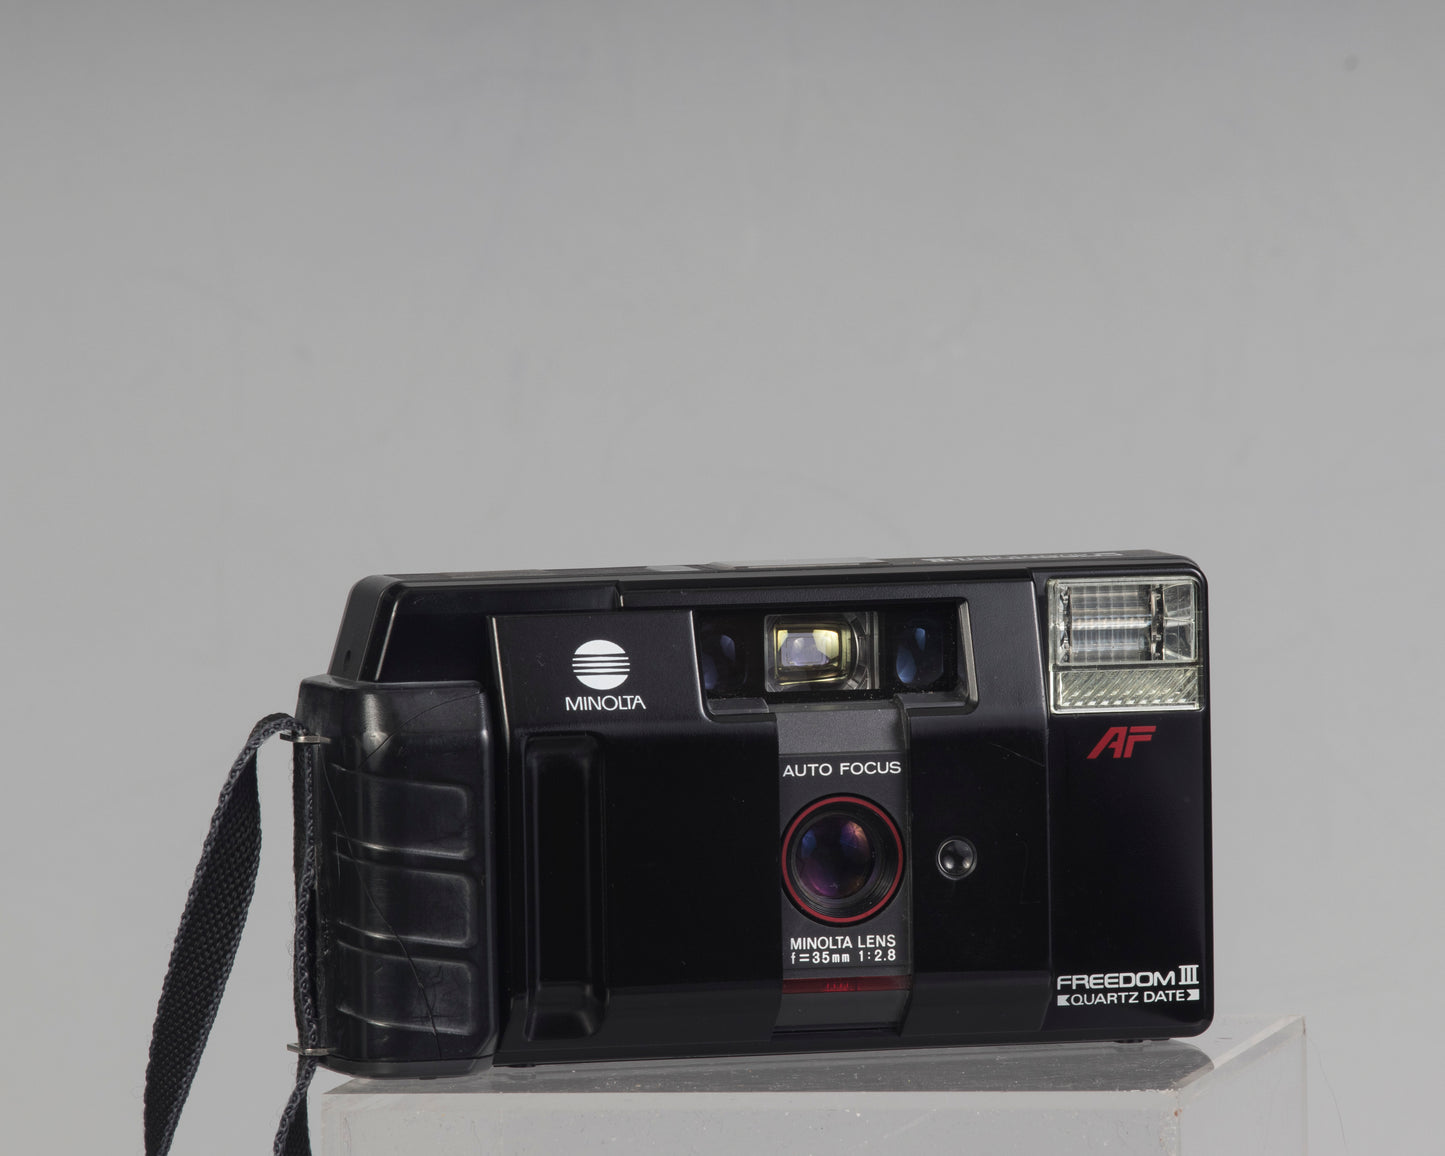 The Minolta Freedom III (aka Minolta AF-Z or Minolta MAC-7) a quality 35mm point-and-shoot from the late 1980s